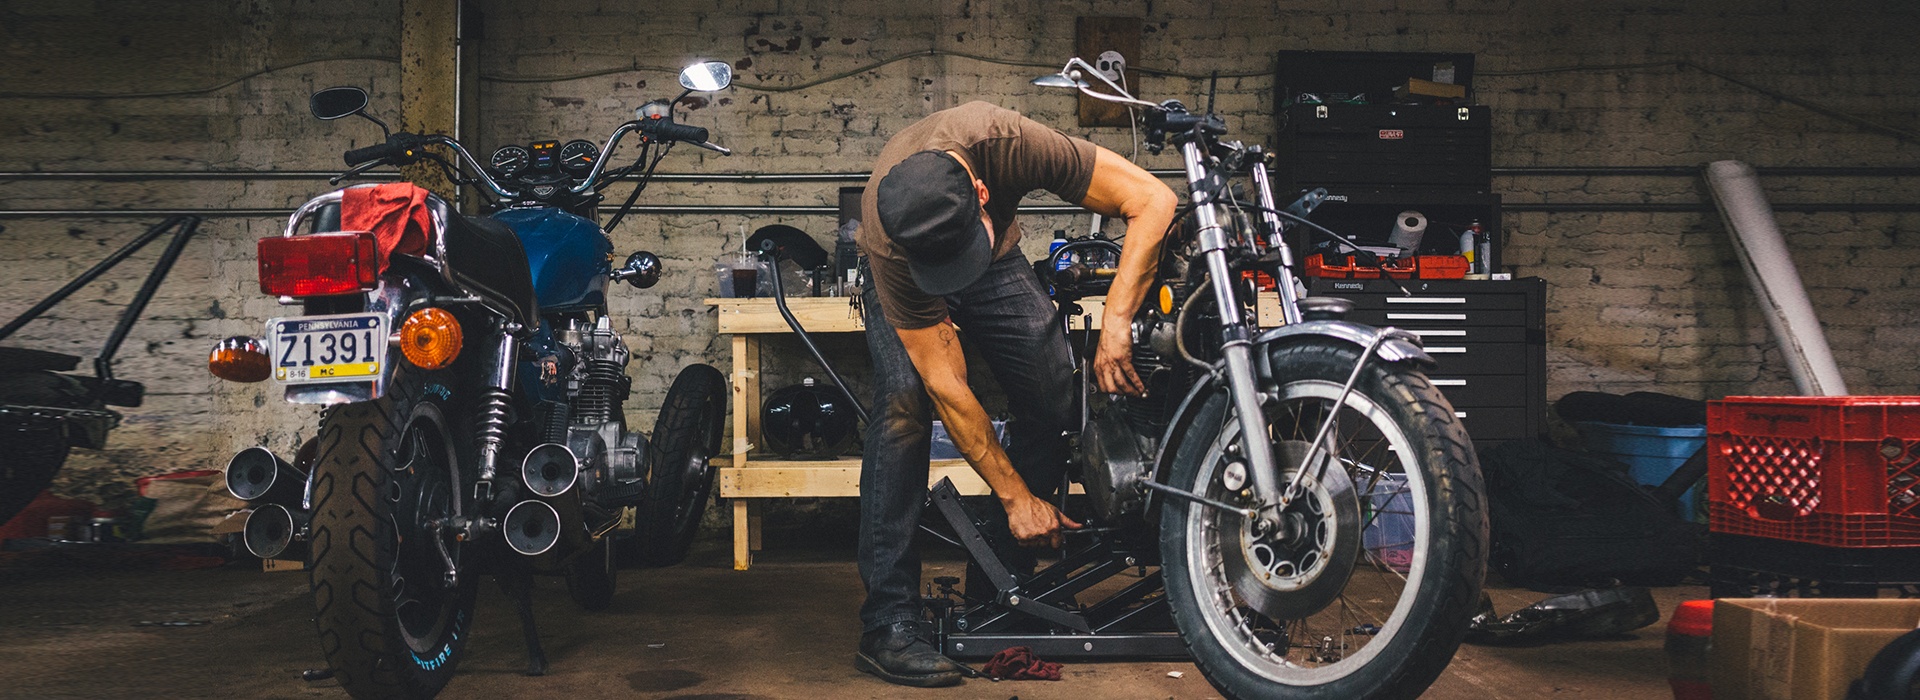 The Cool Material Bike Build: Get ‘Er Going